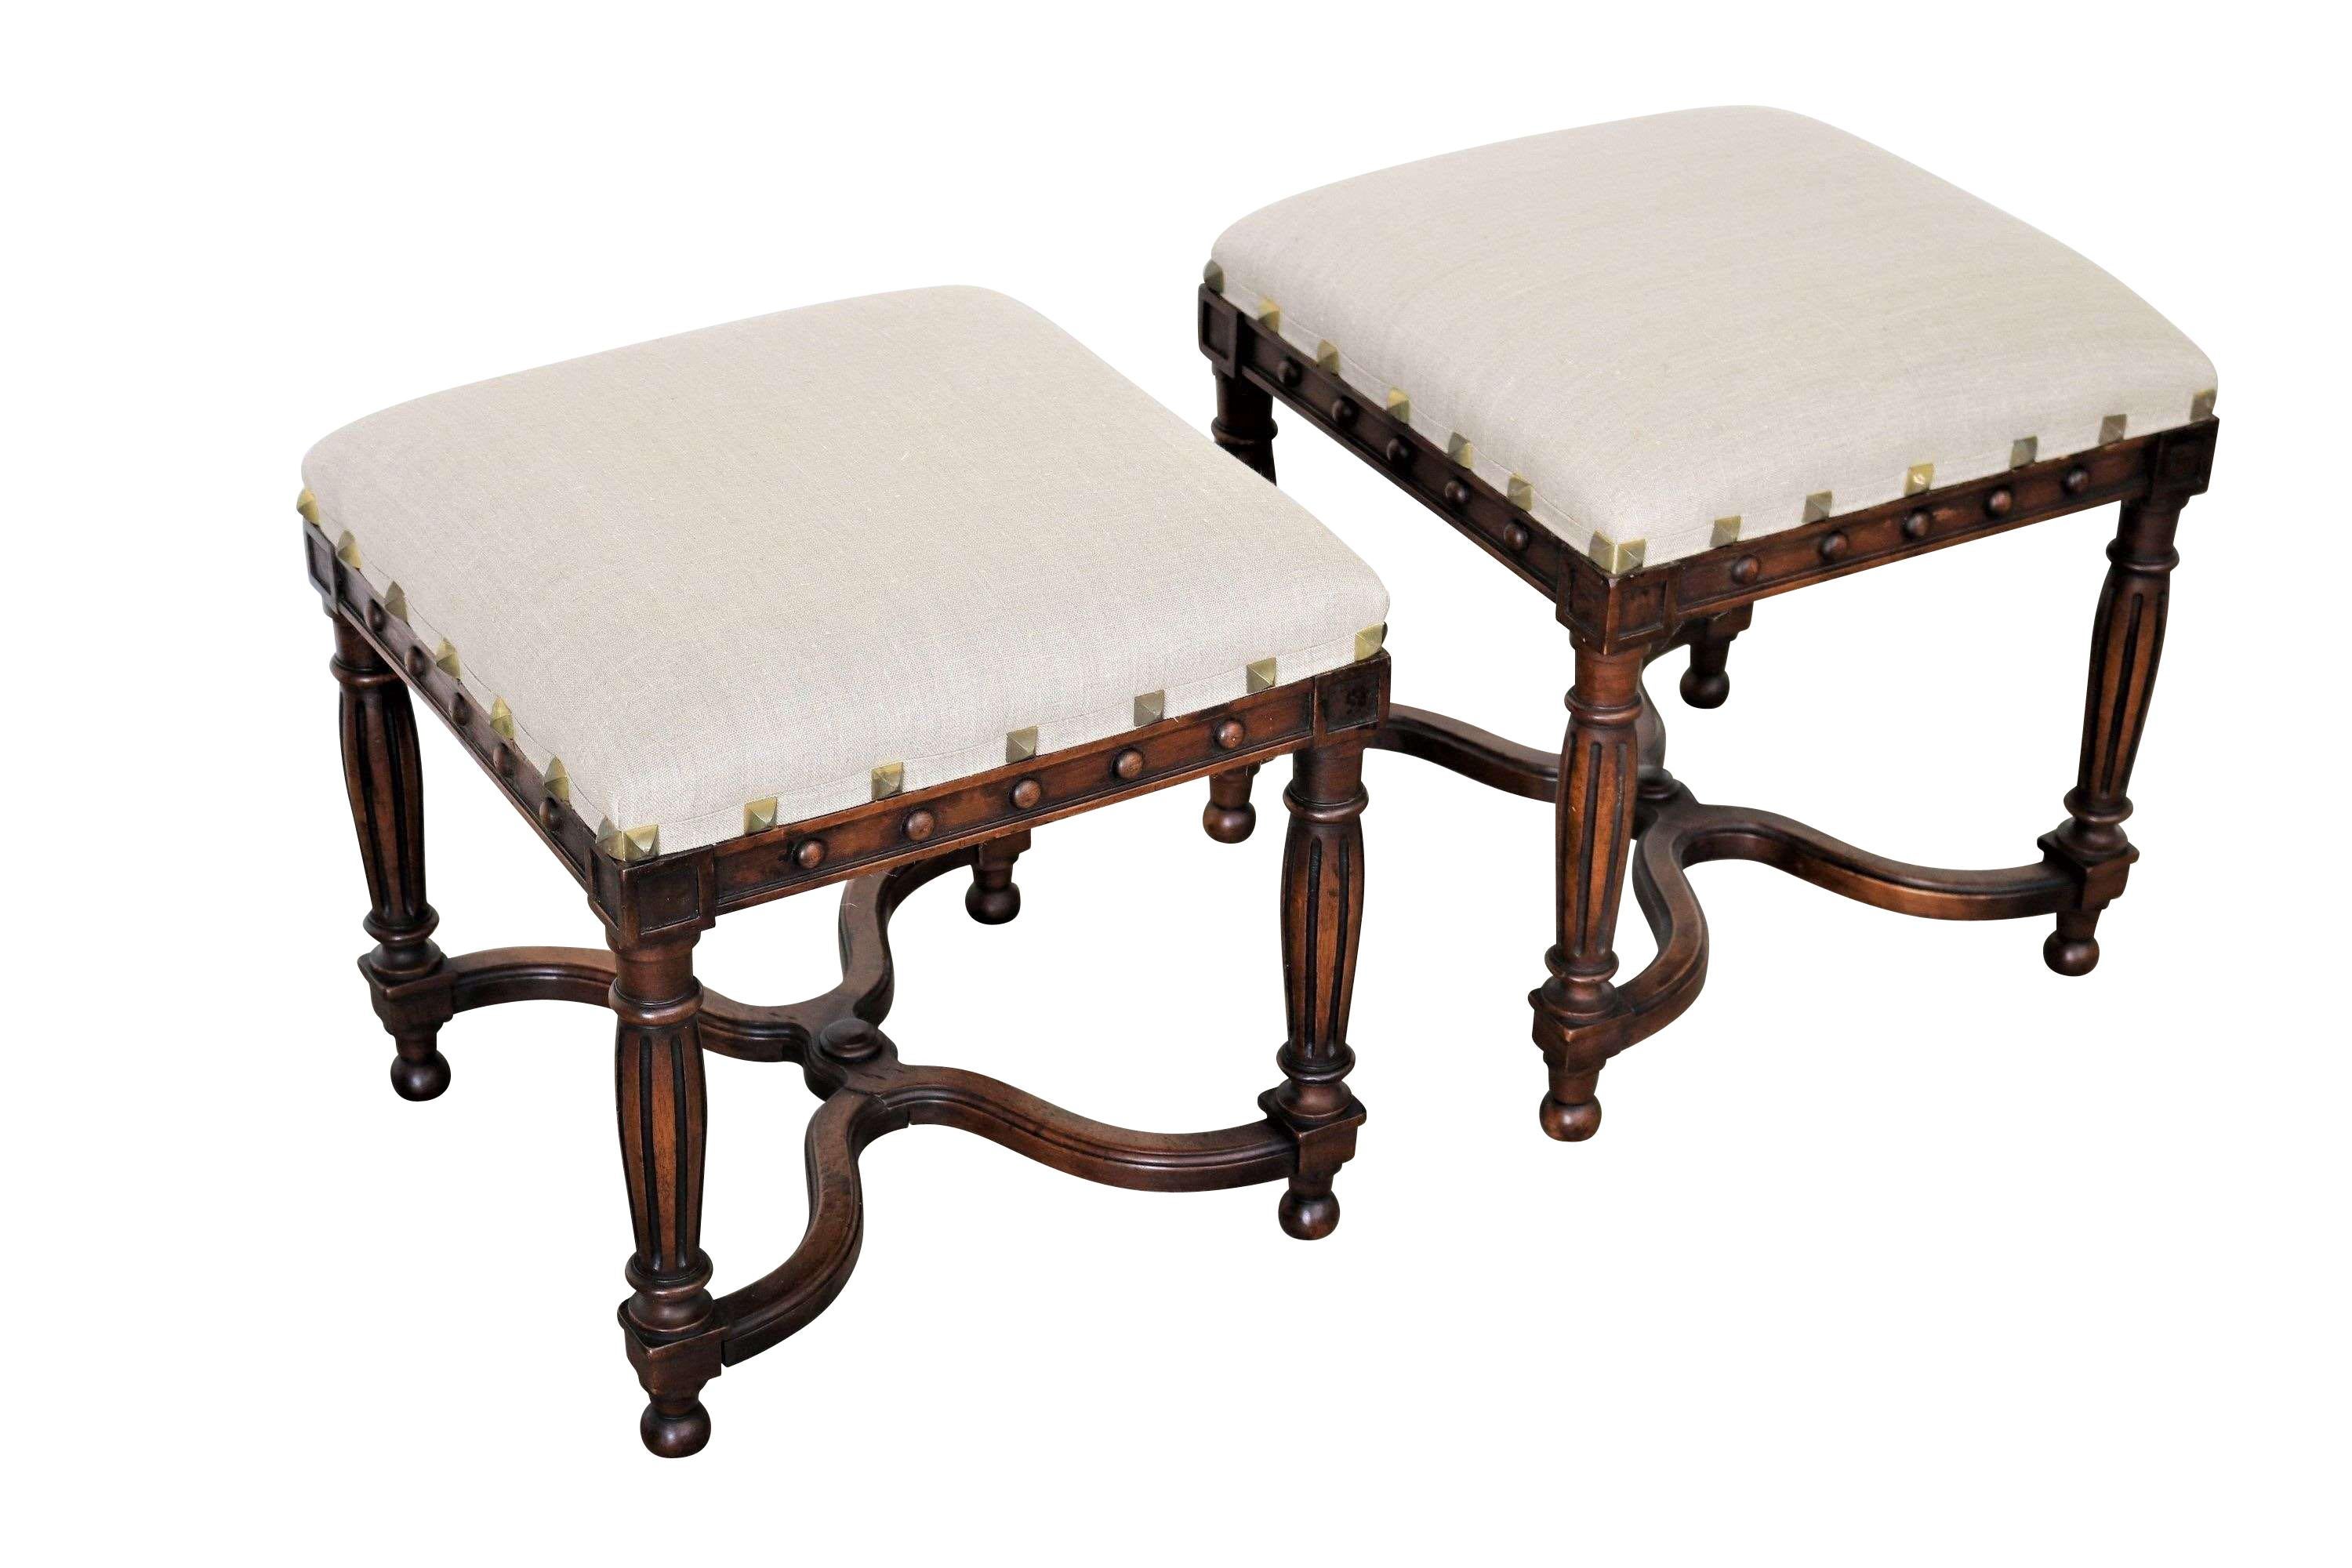 19th century English pair of upholstered walnut foot stools.
Decorative fluted legs.
Traditional X shaped stretcher at bottom.
Newly reupholstered in Belgian linen.
Decorative large brass tacking around apron.
 